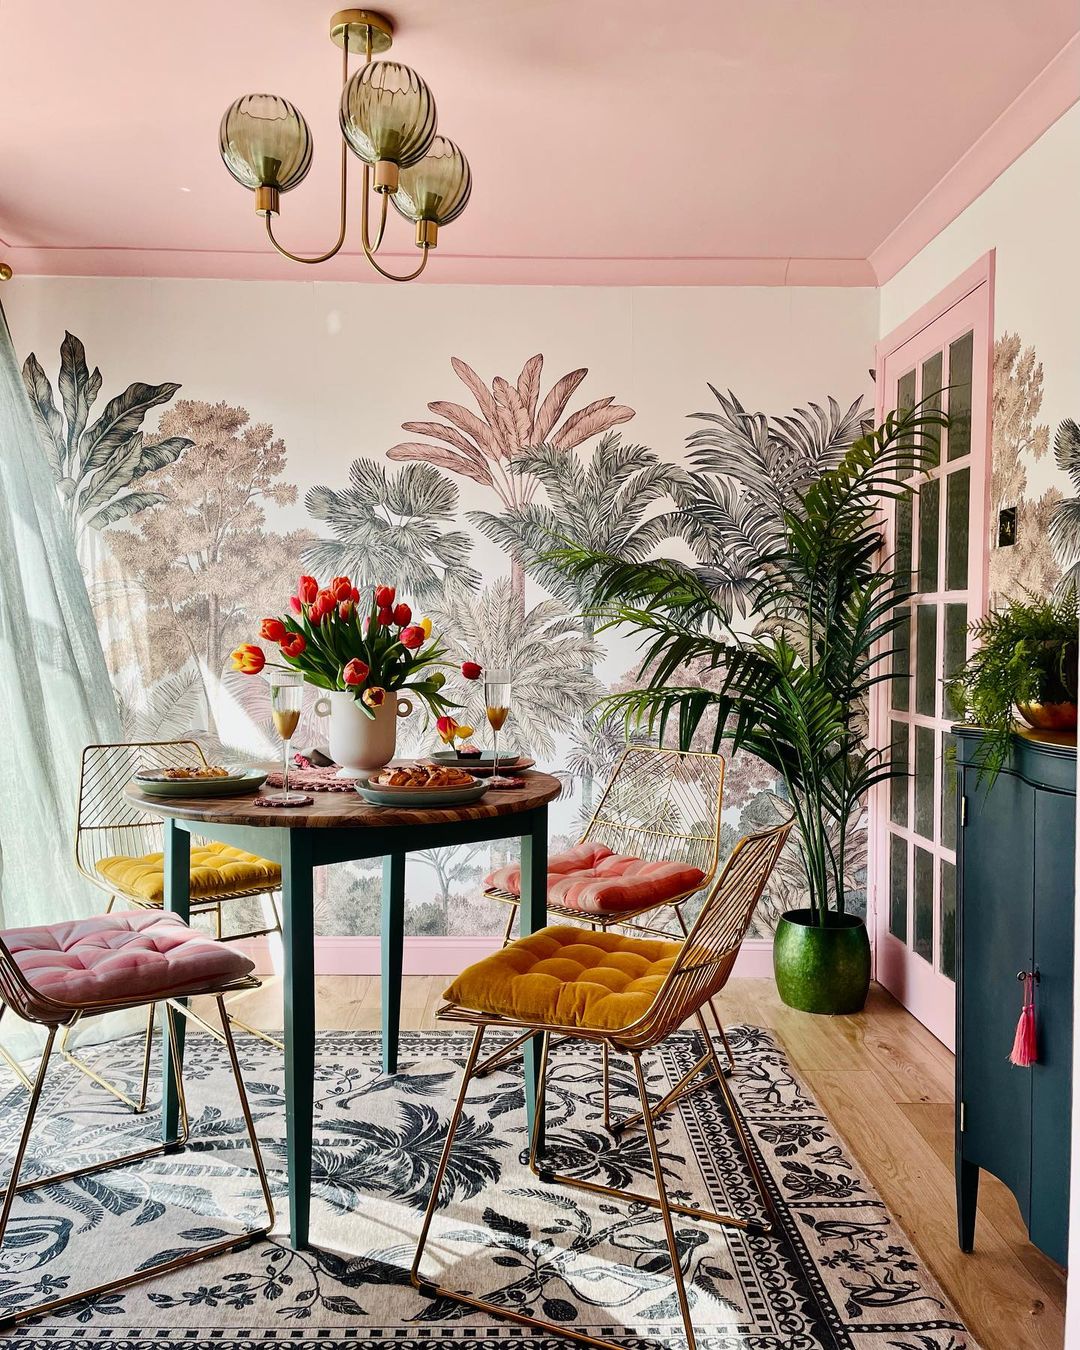 mixing different vibrant colors, a richly decorated wallpaper, and a potted green plant is all that's needed to create an uplifting interior